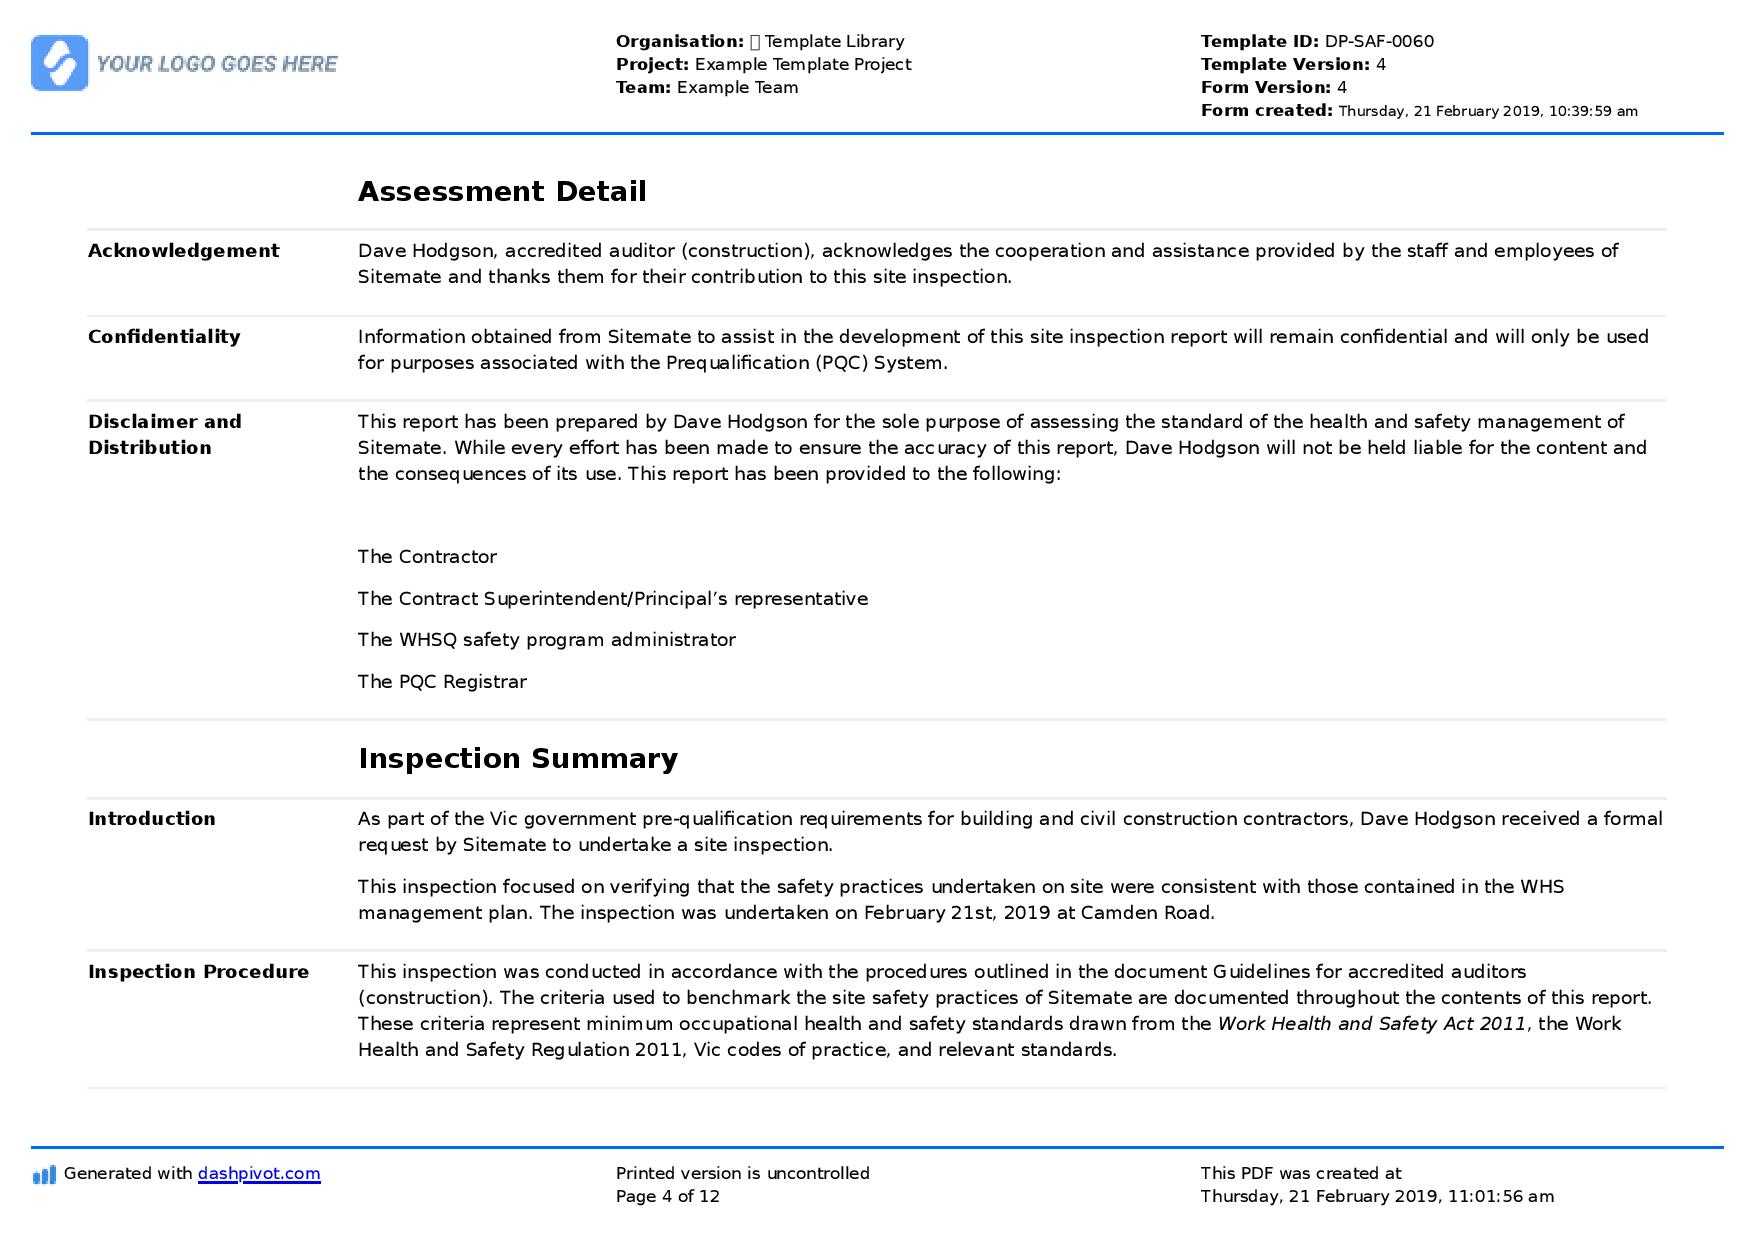 Site Inspection Report: Free Template, Sample And A Proven Within Engineering Inspection Report Template